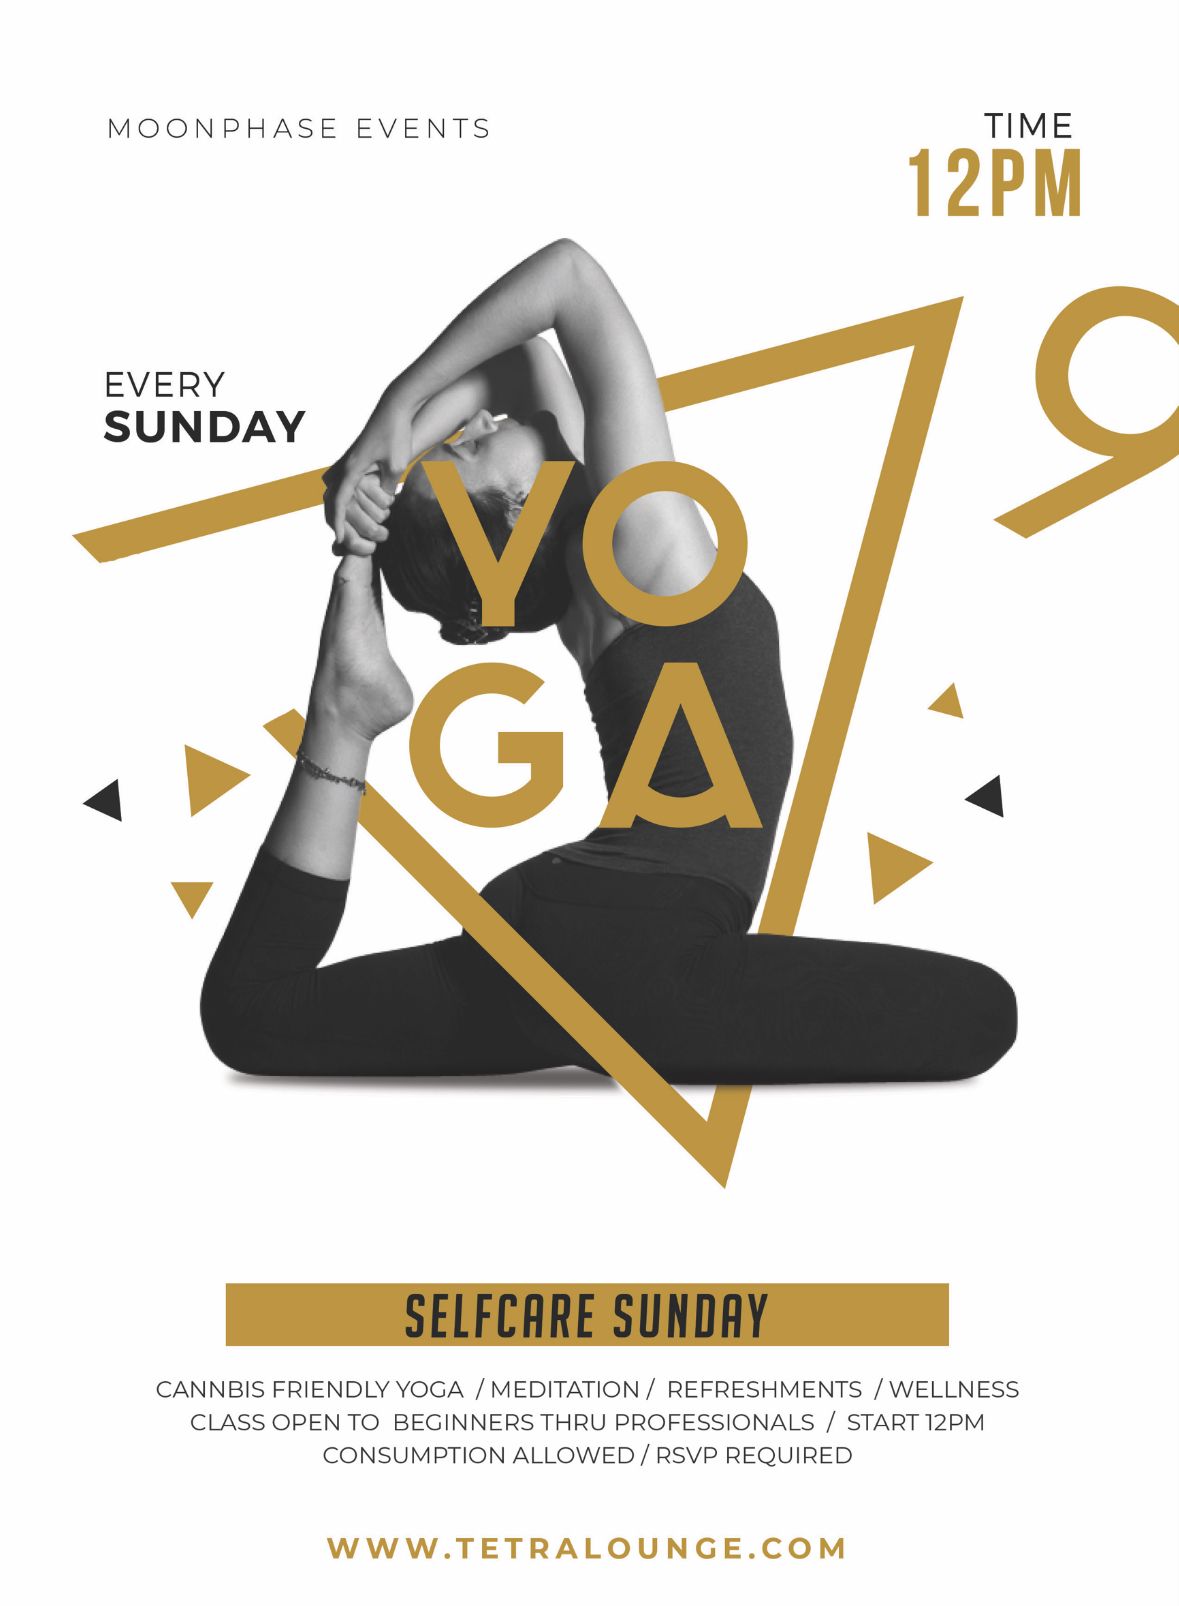 CannaYoga - A Sunday Selfcare Series with Tetra x Moonphase Events 